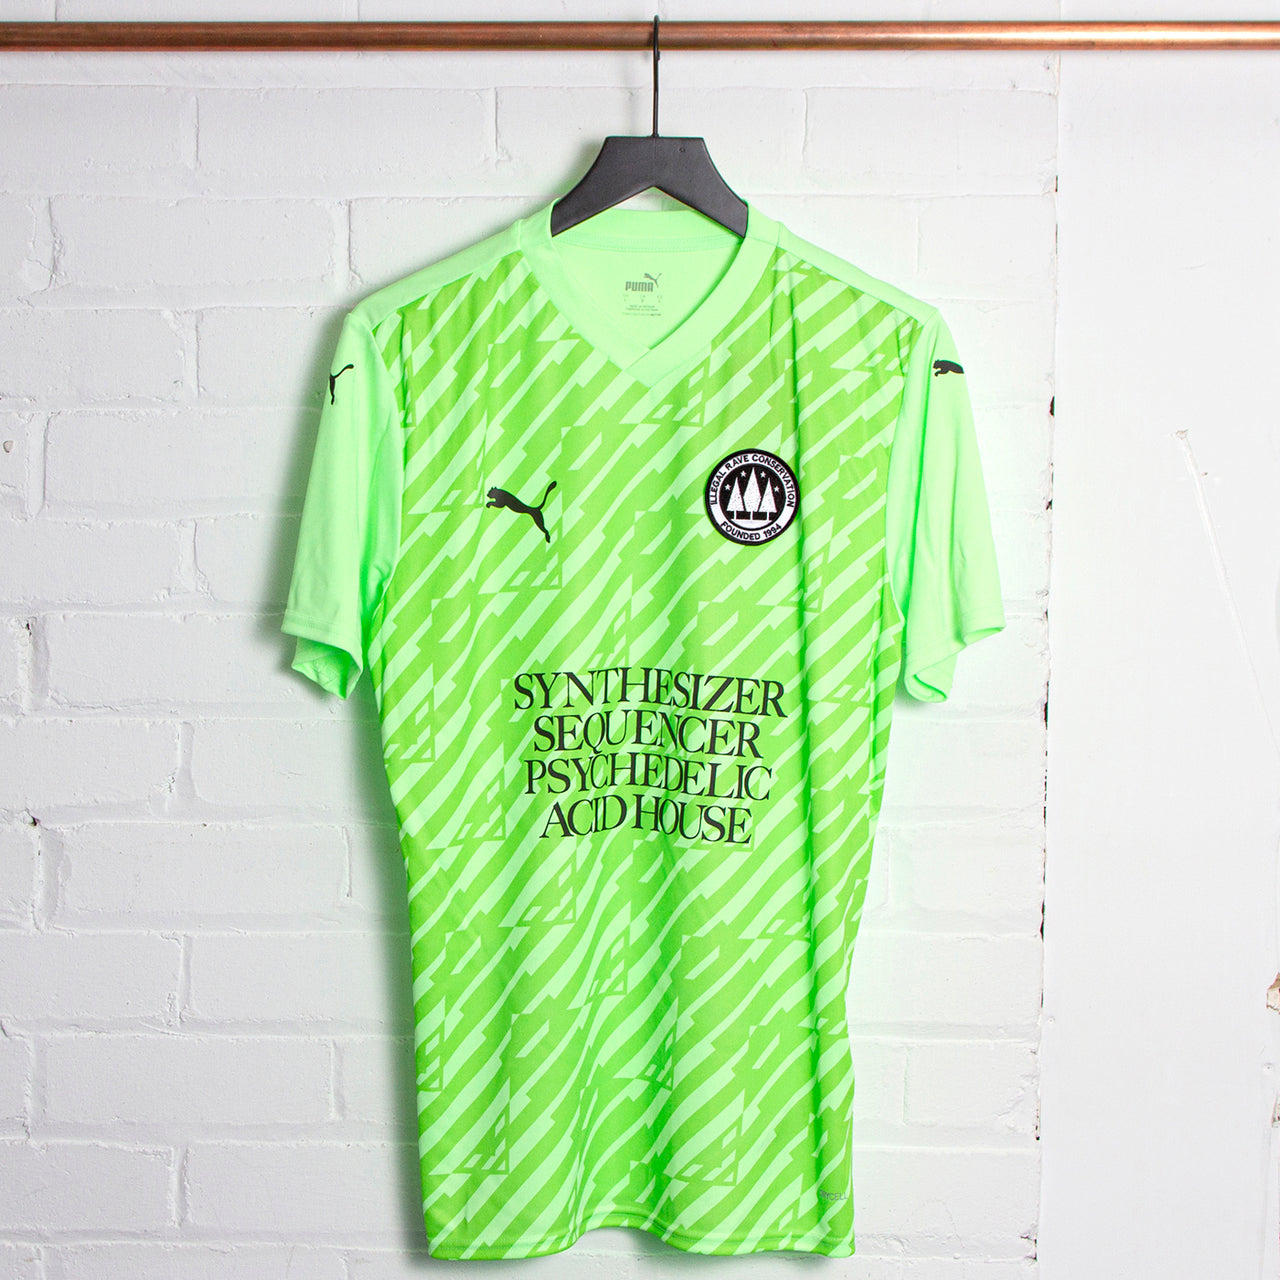 Wasted Heroes FC TeamCup - Jersey - Lime Rave